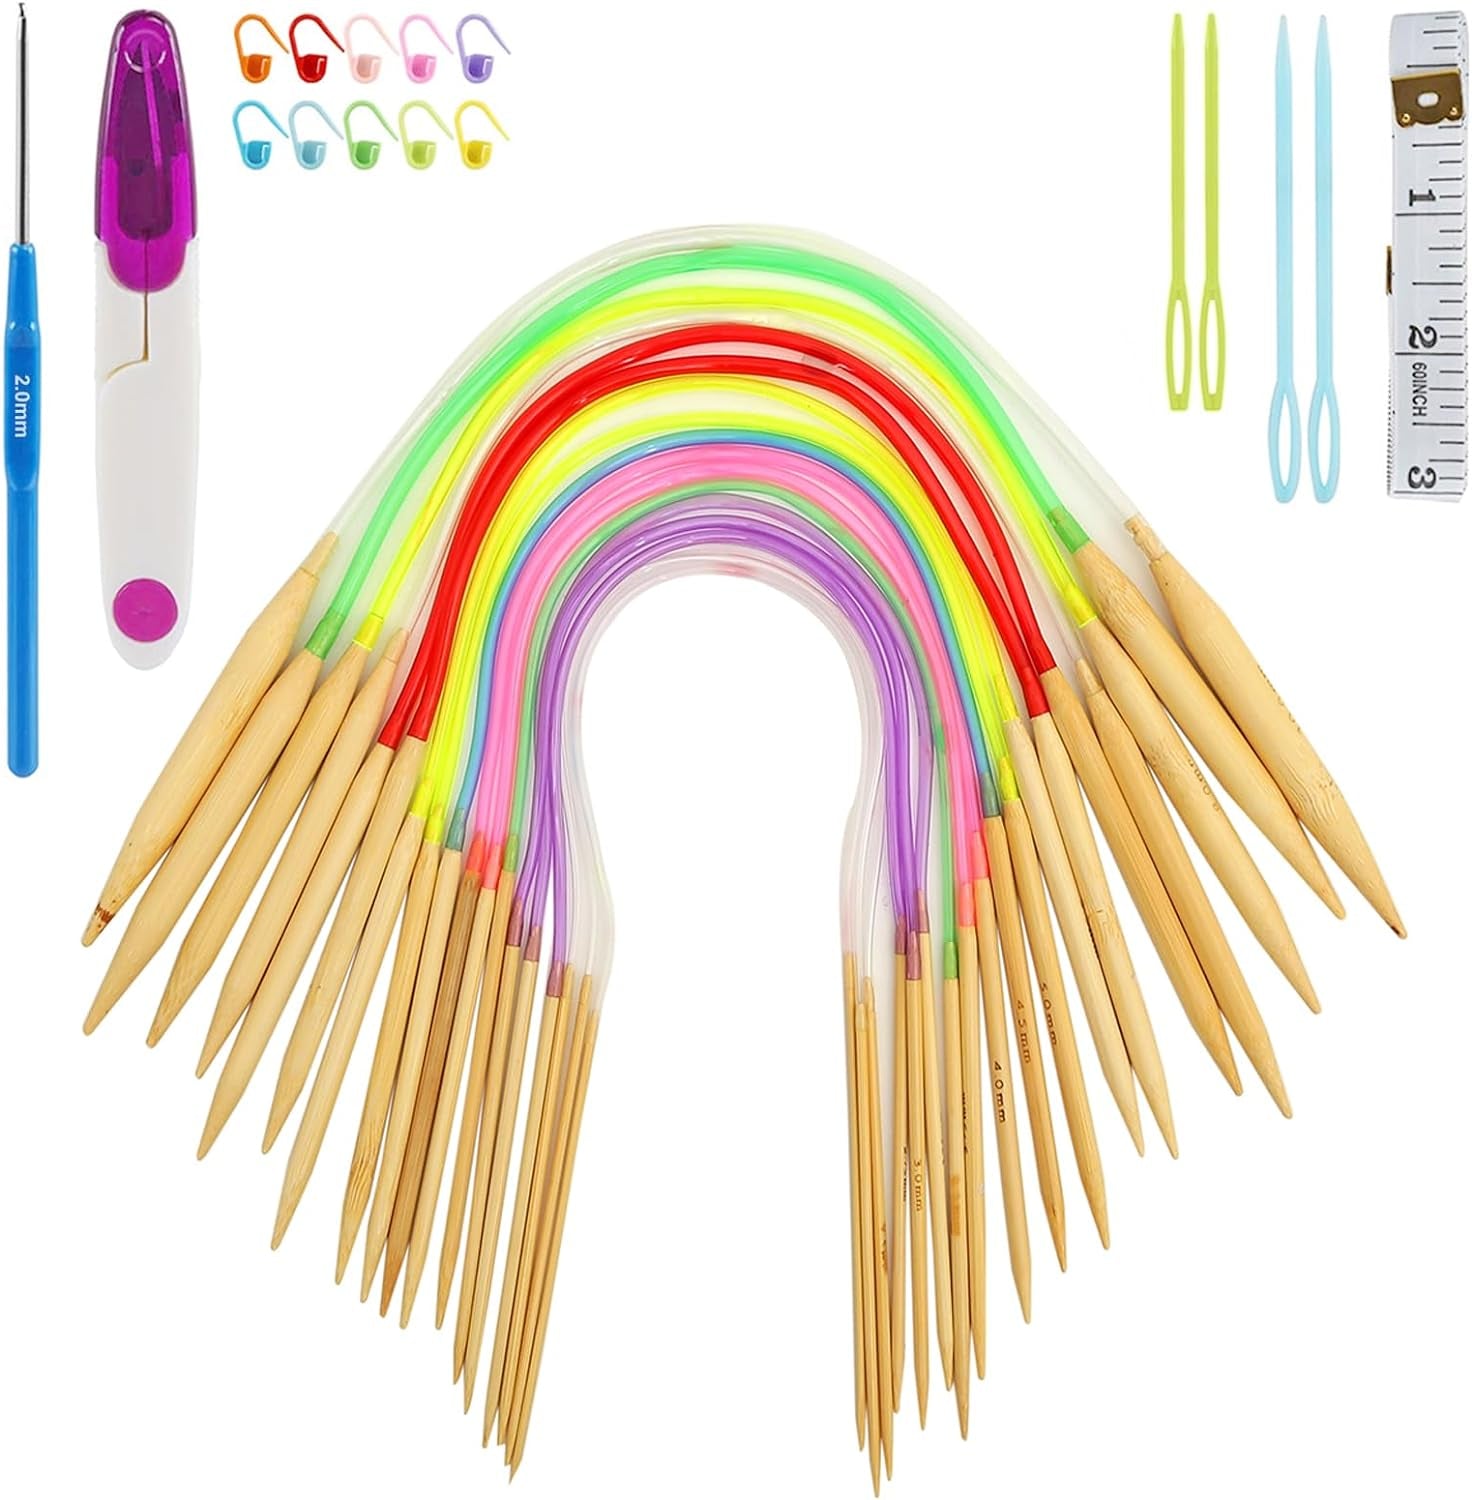 Bamboo Knitting Needles Set -18 Pairscircular Wooden Knitting Needles with Colorful Plastic Tube, Small Tools for Weave Are Included, 18 Sizes: 2Mm - 10Mm, 31.5" Length